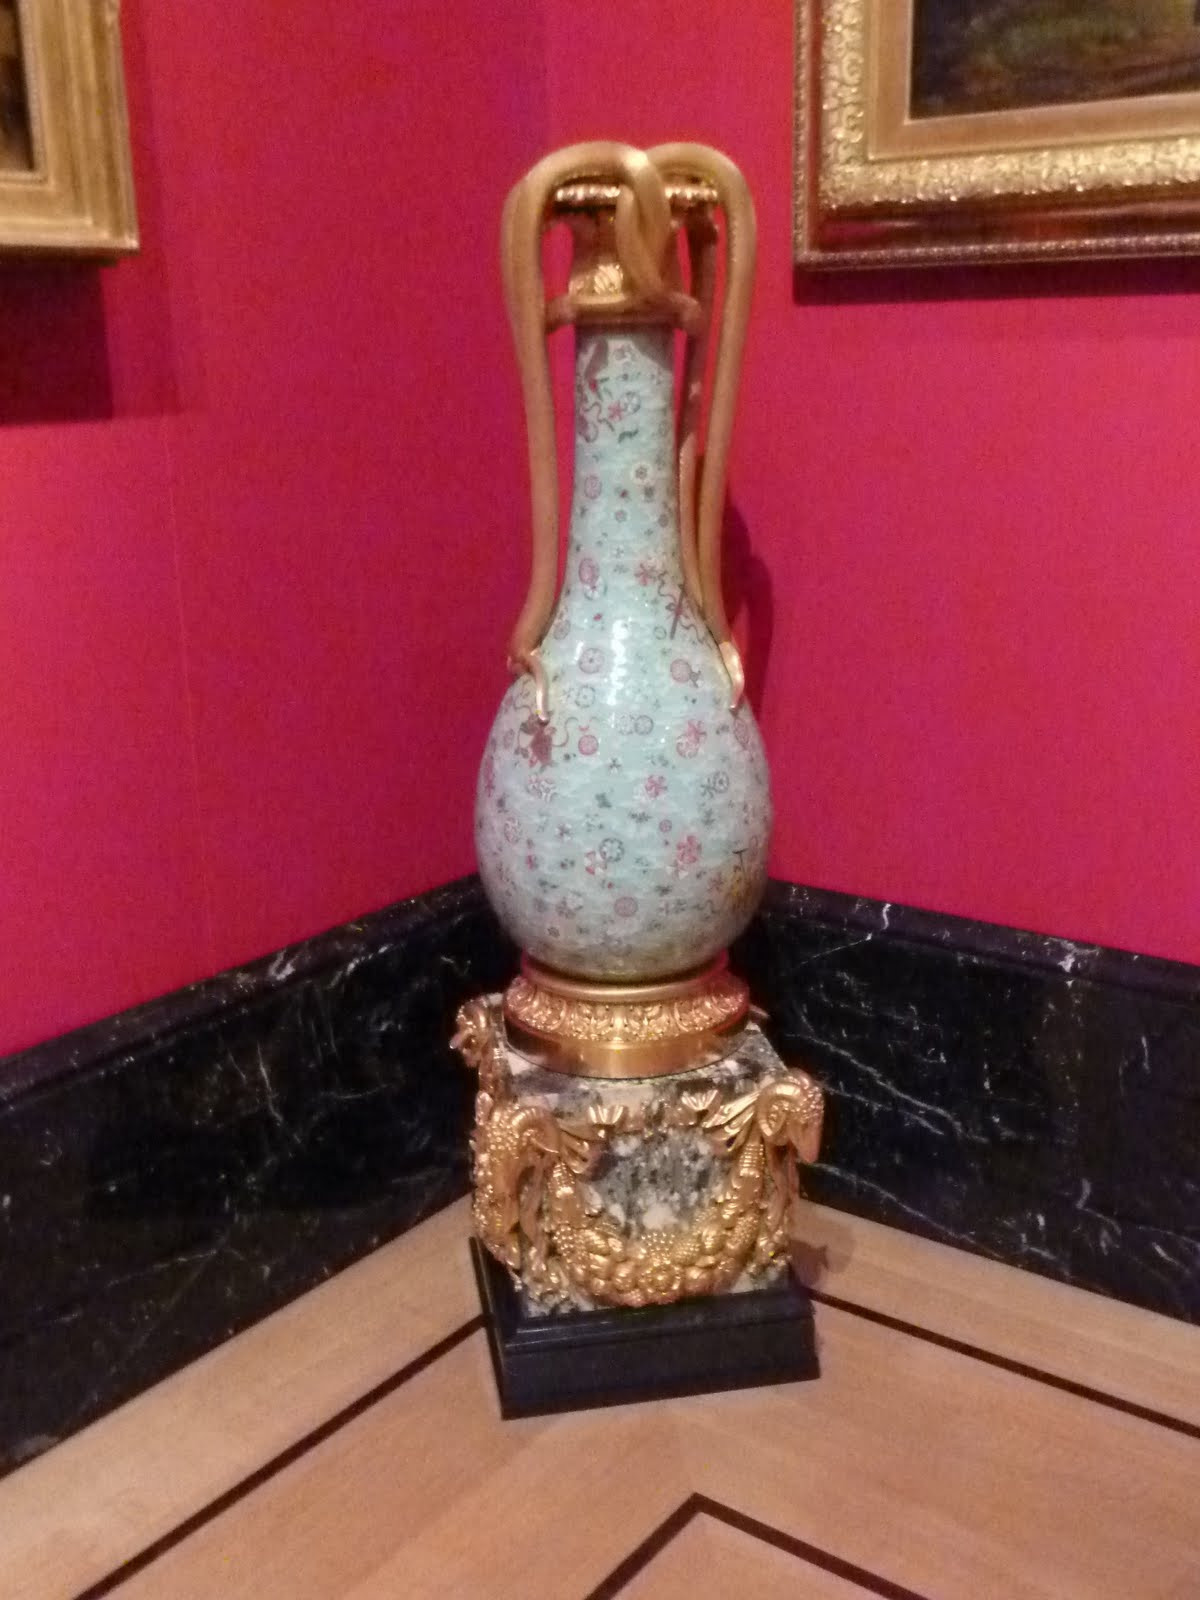 11 Stunning Most Expensive Vase In the World 2024 free download most expensive vase in the world of uncategorized page 196 number one london for one of a pair of chinese bottle vases and stands c 1814 of porcelain with gilt bronze mounts by benjamin vull